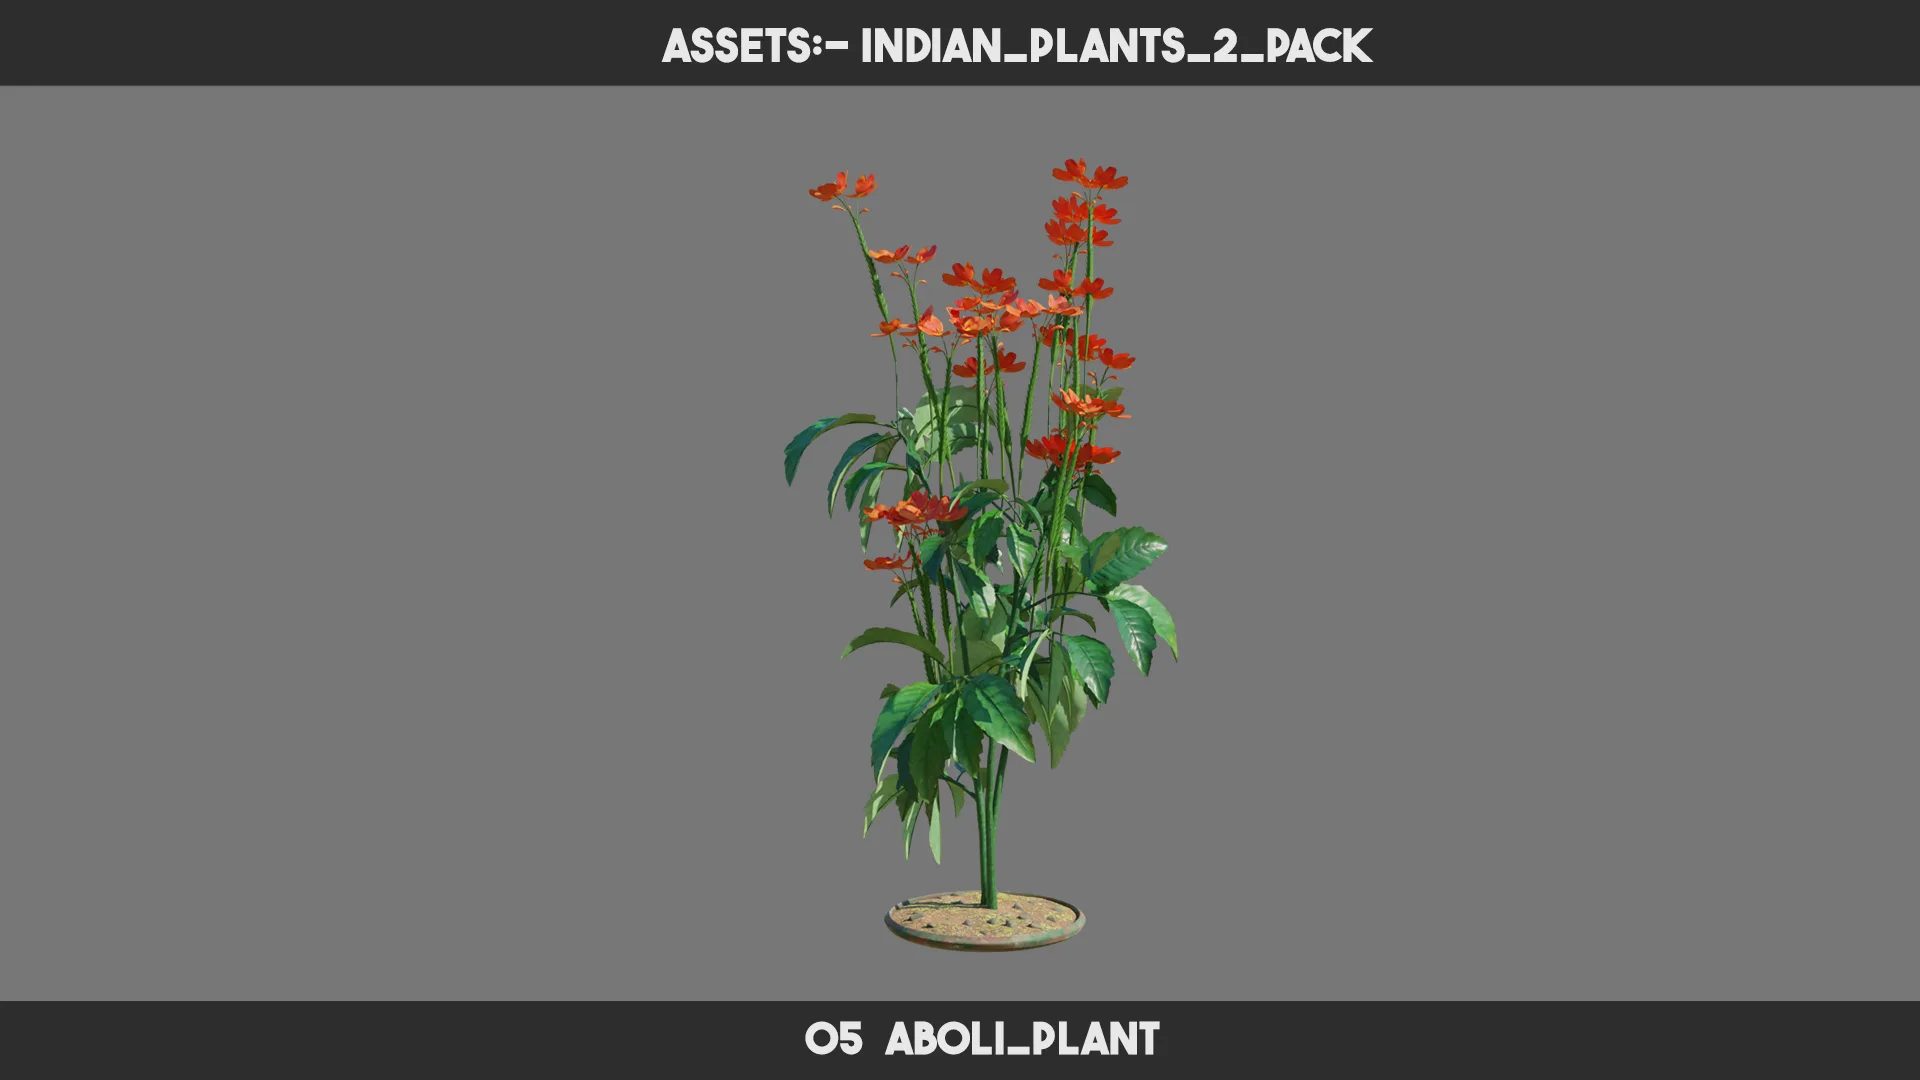 Indian Plants 2 PACK